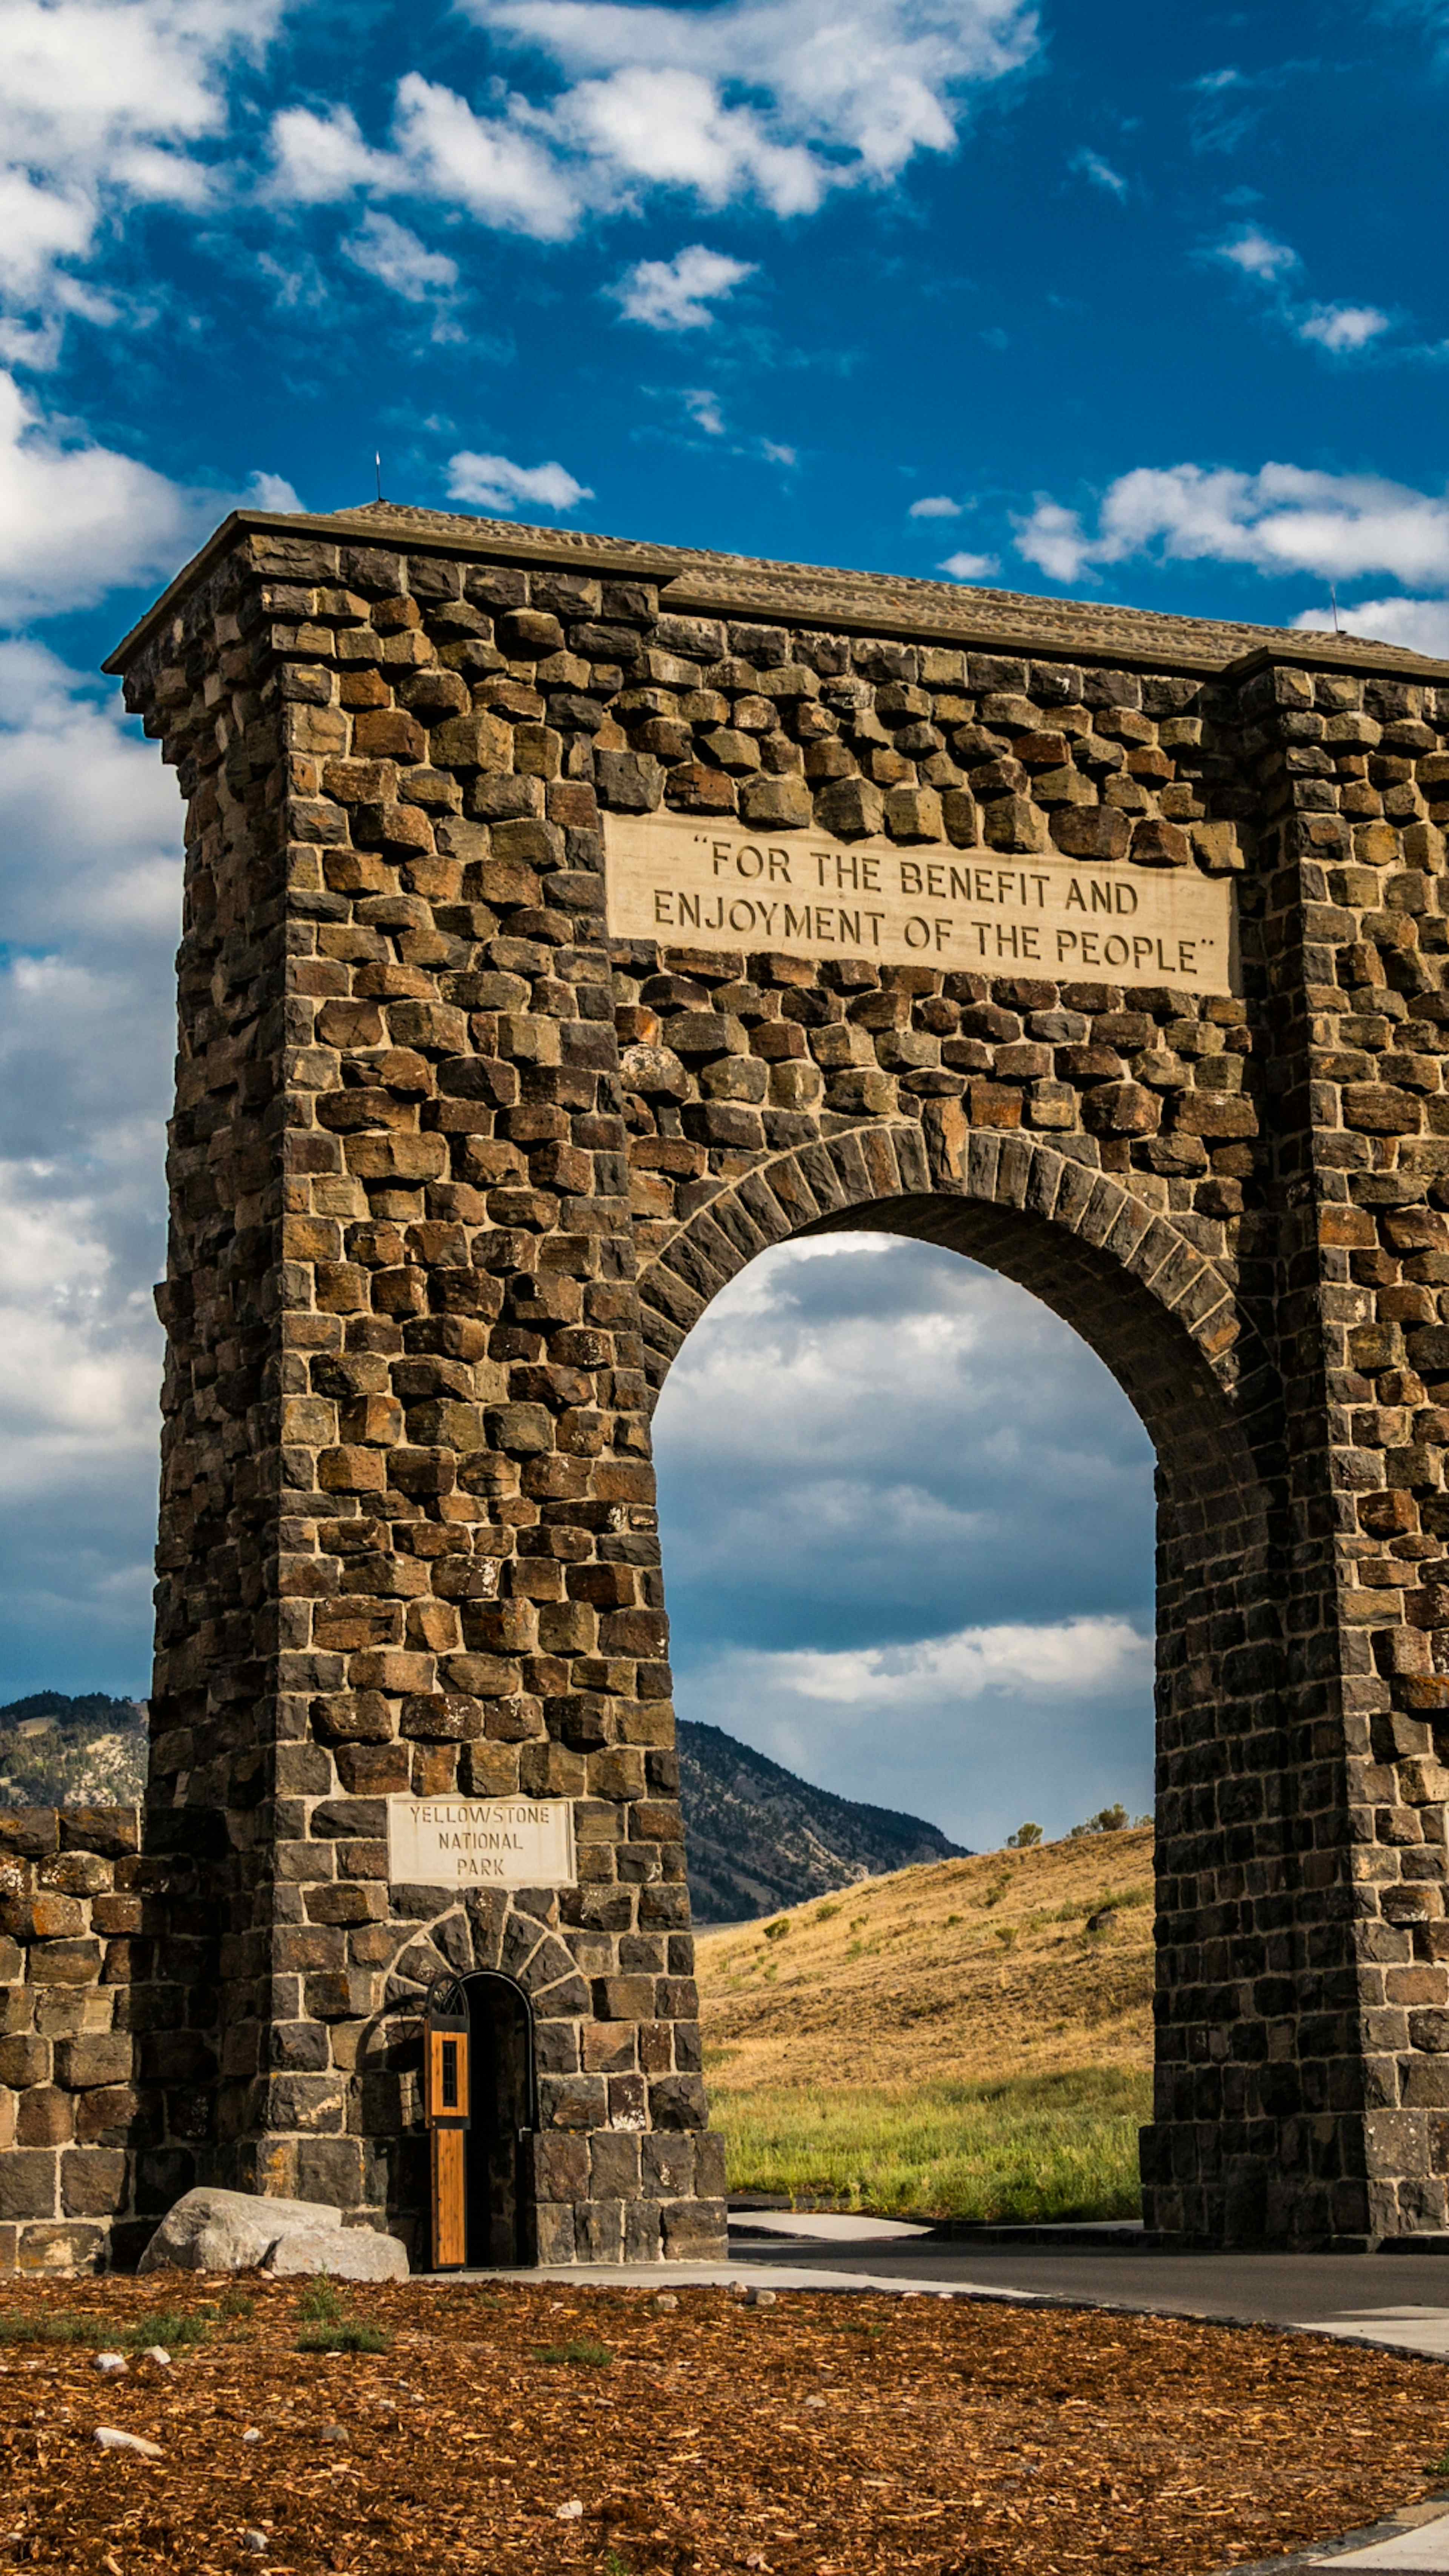 Entry way arch to Yellowstone National Park.